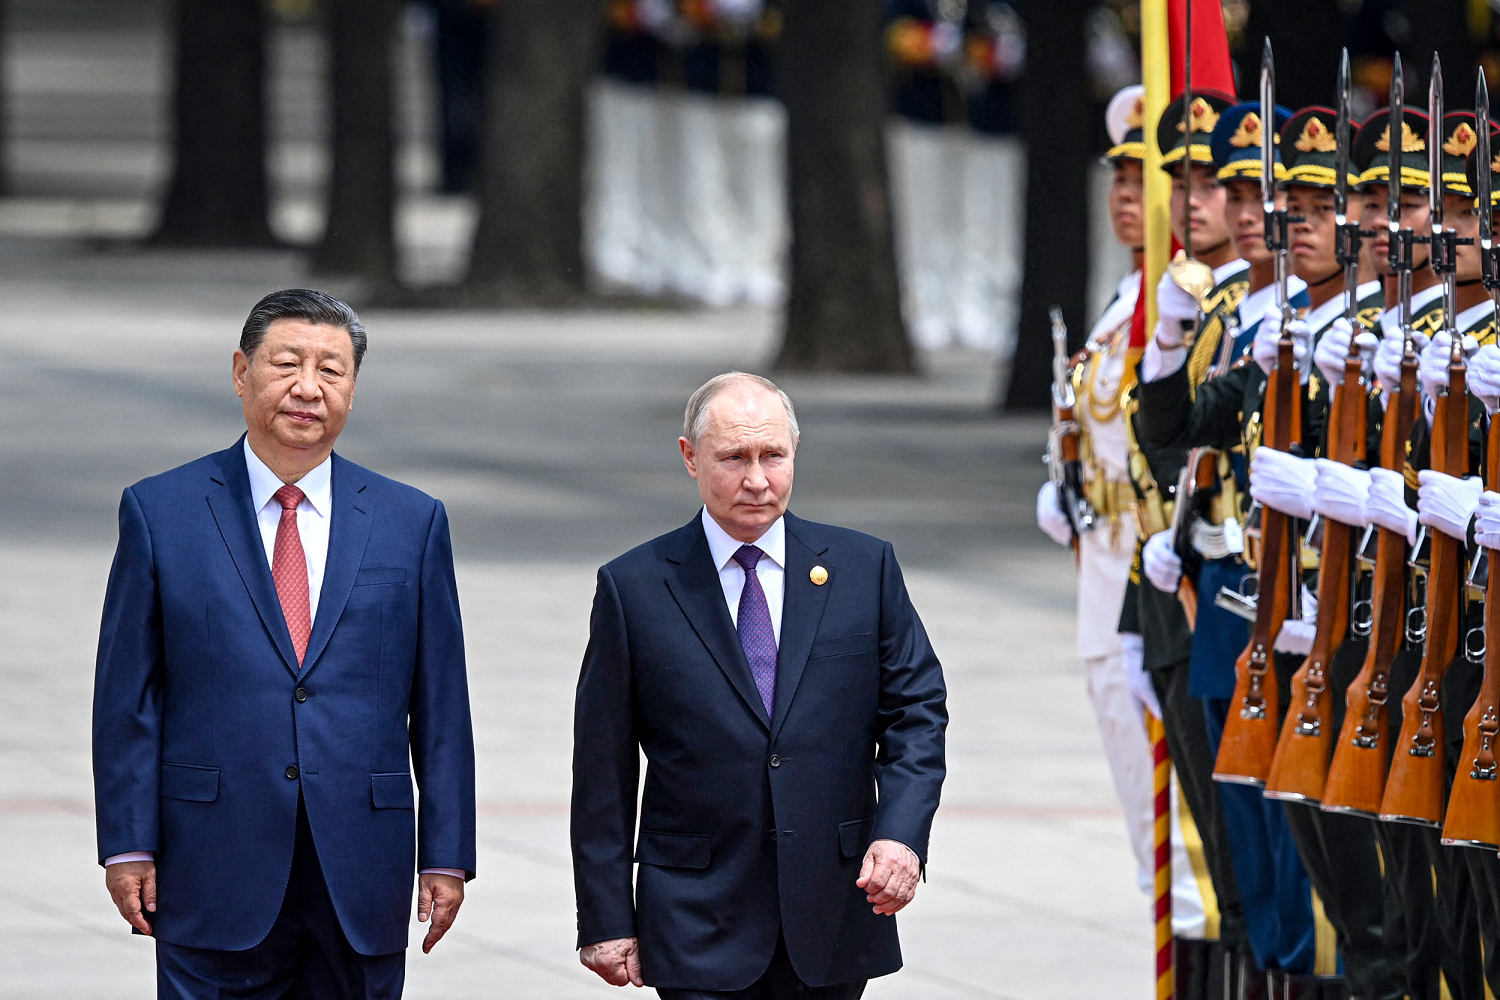 Putin concludes China trip by emphasizing ties with Russia